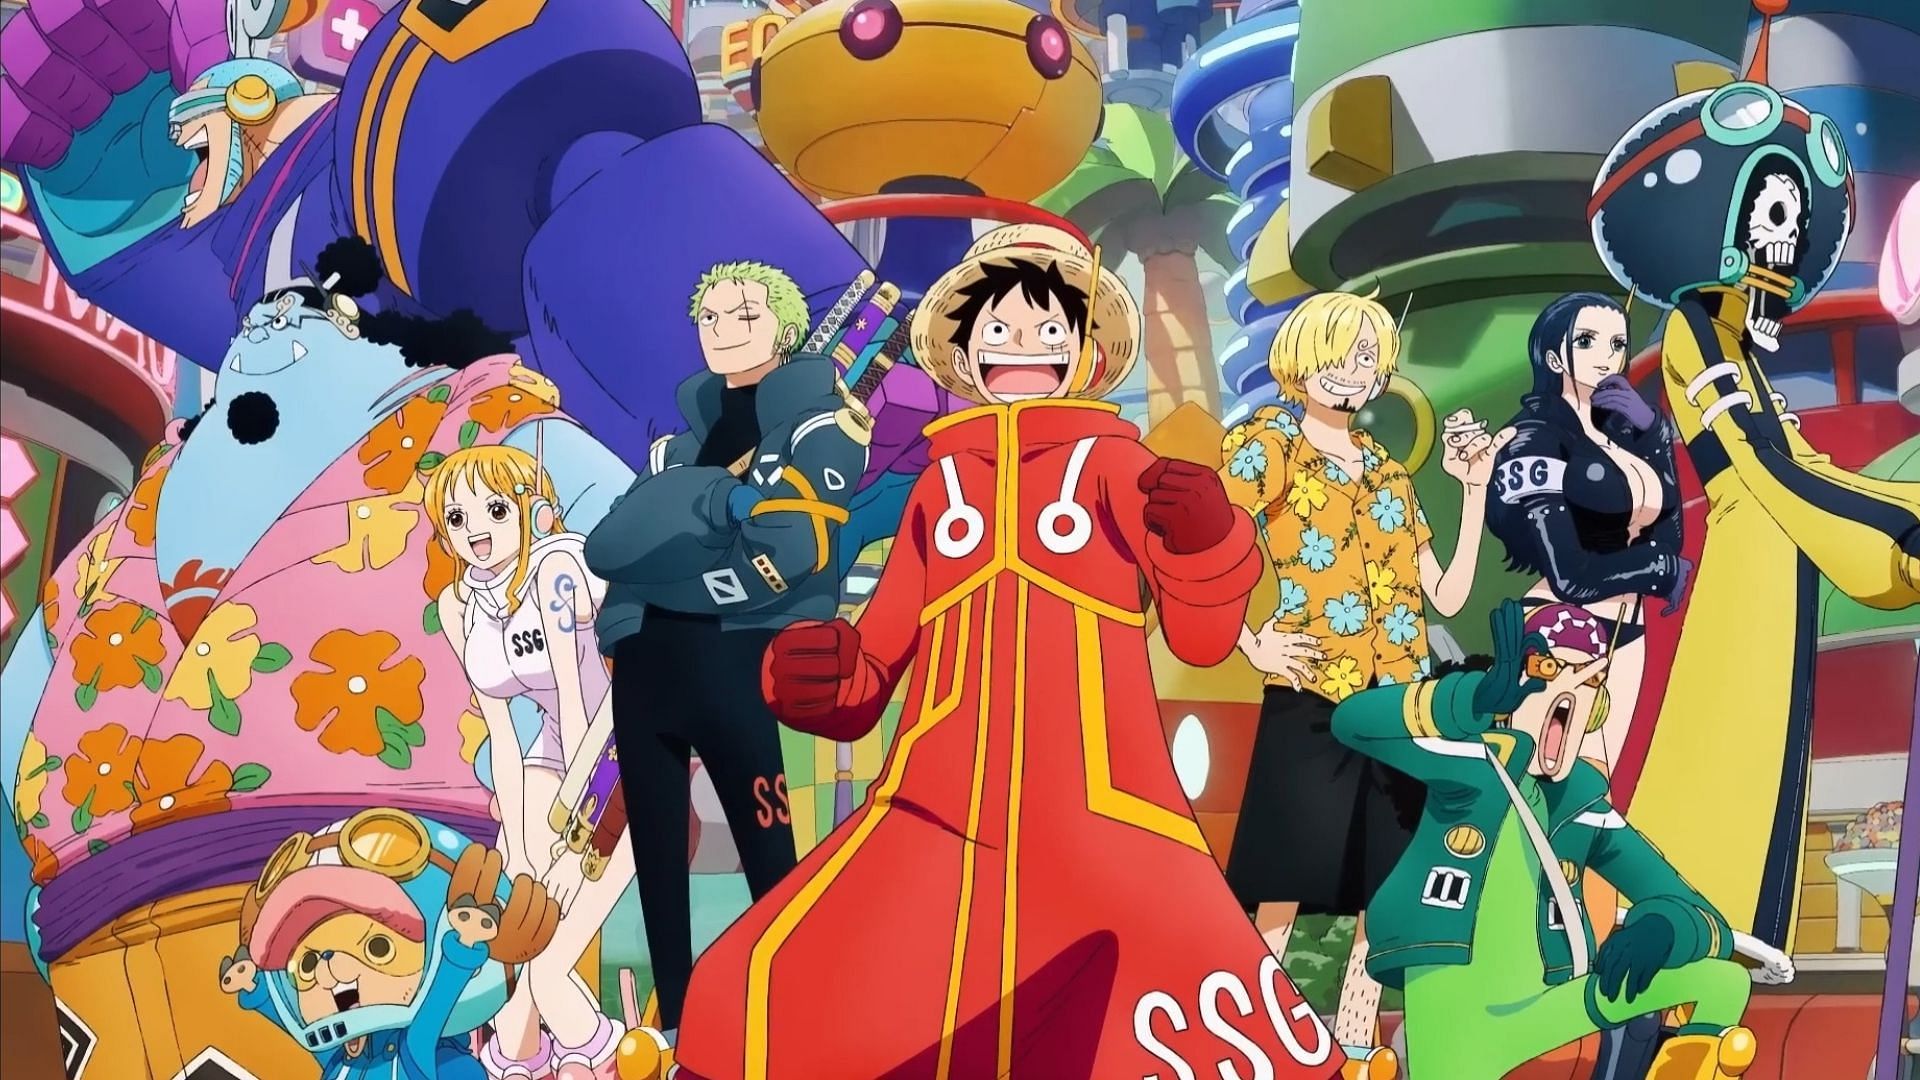 The Straw Hats as seen in the Egghead arc PV (Image via Toei Animation)